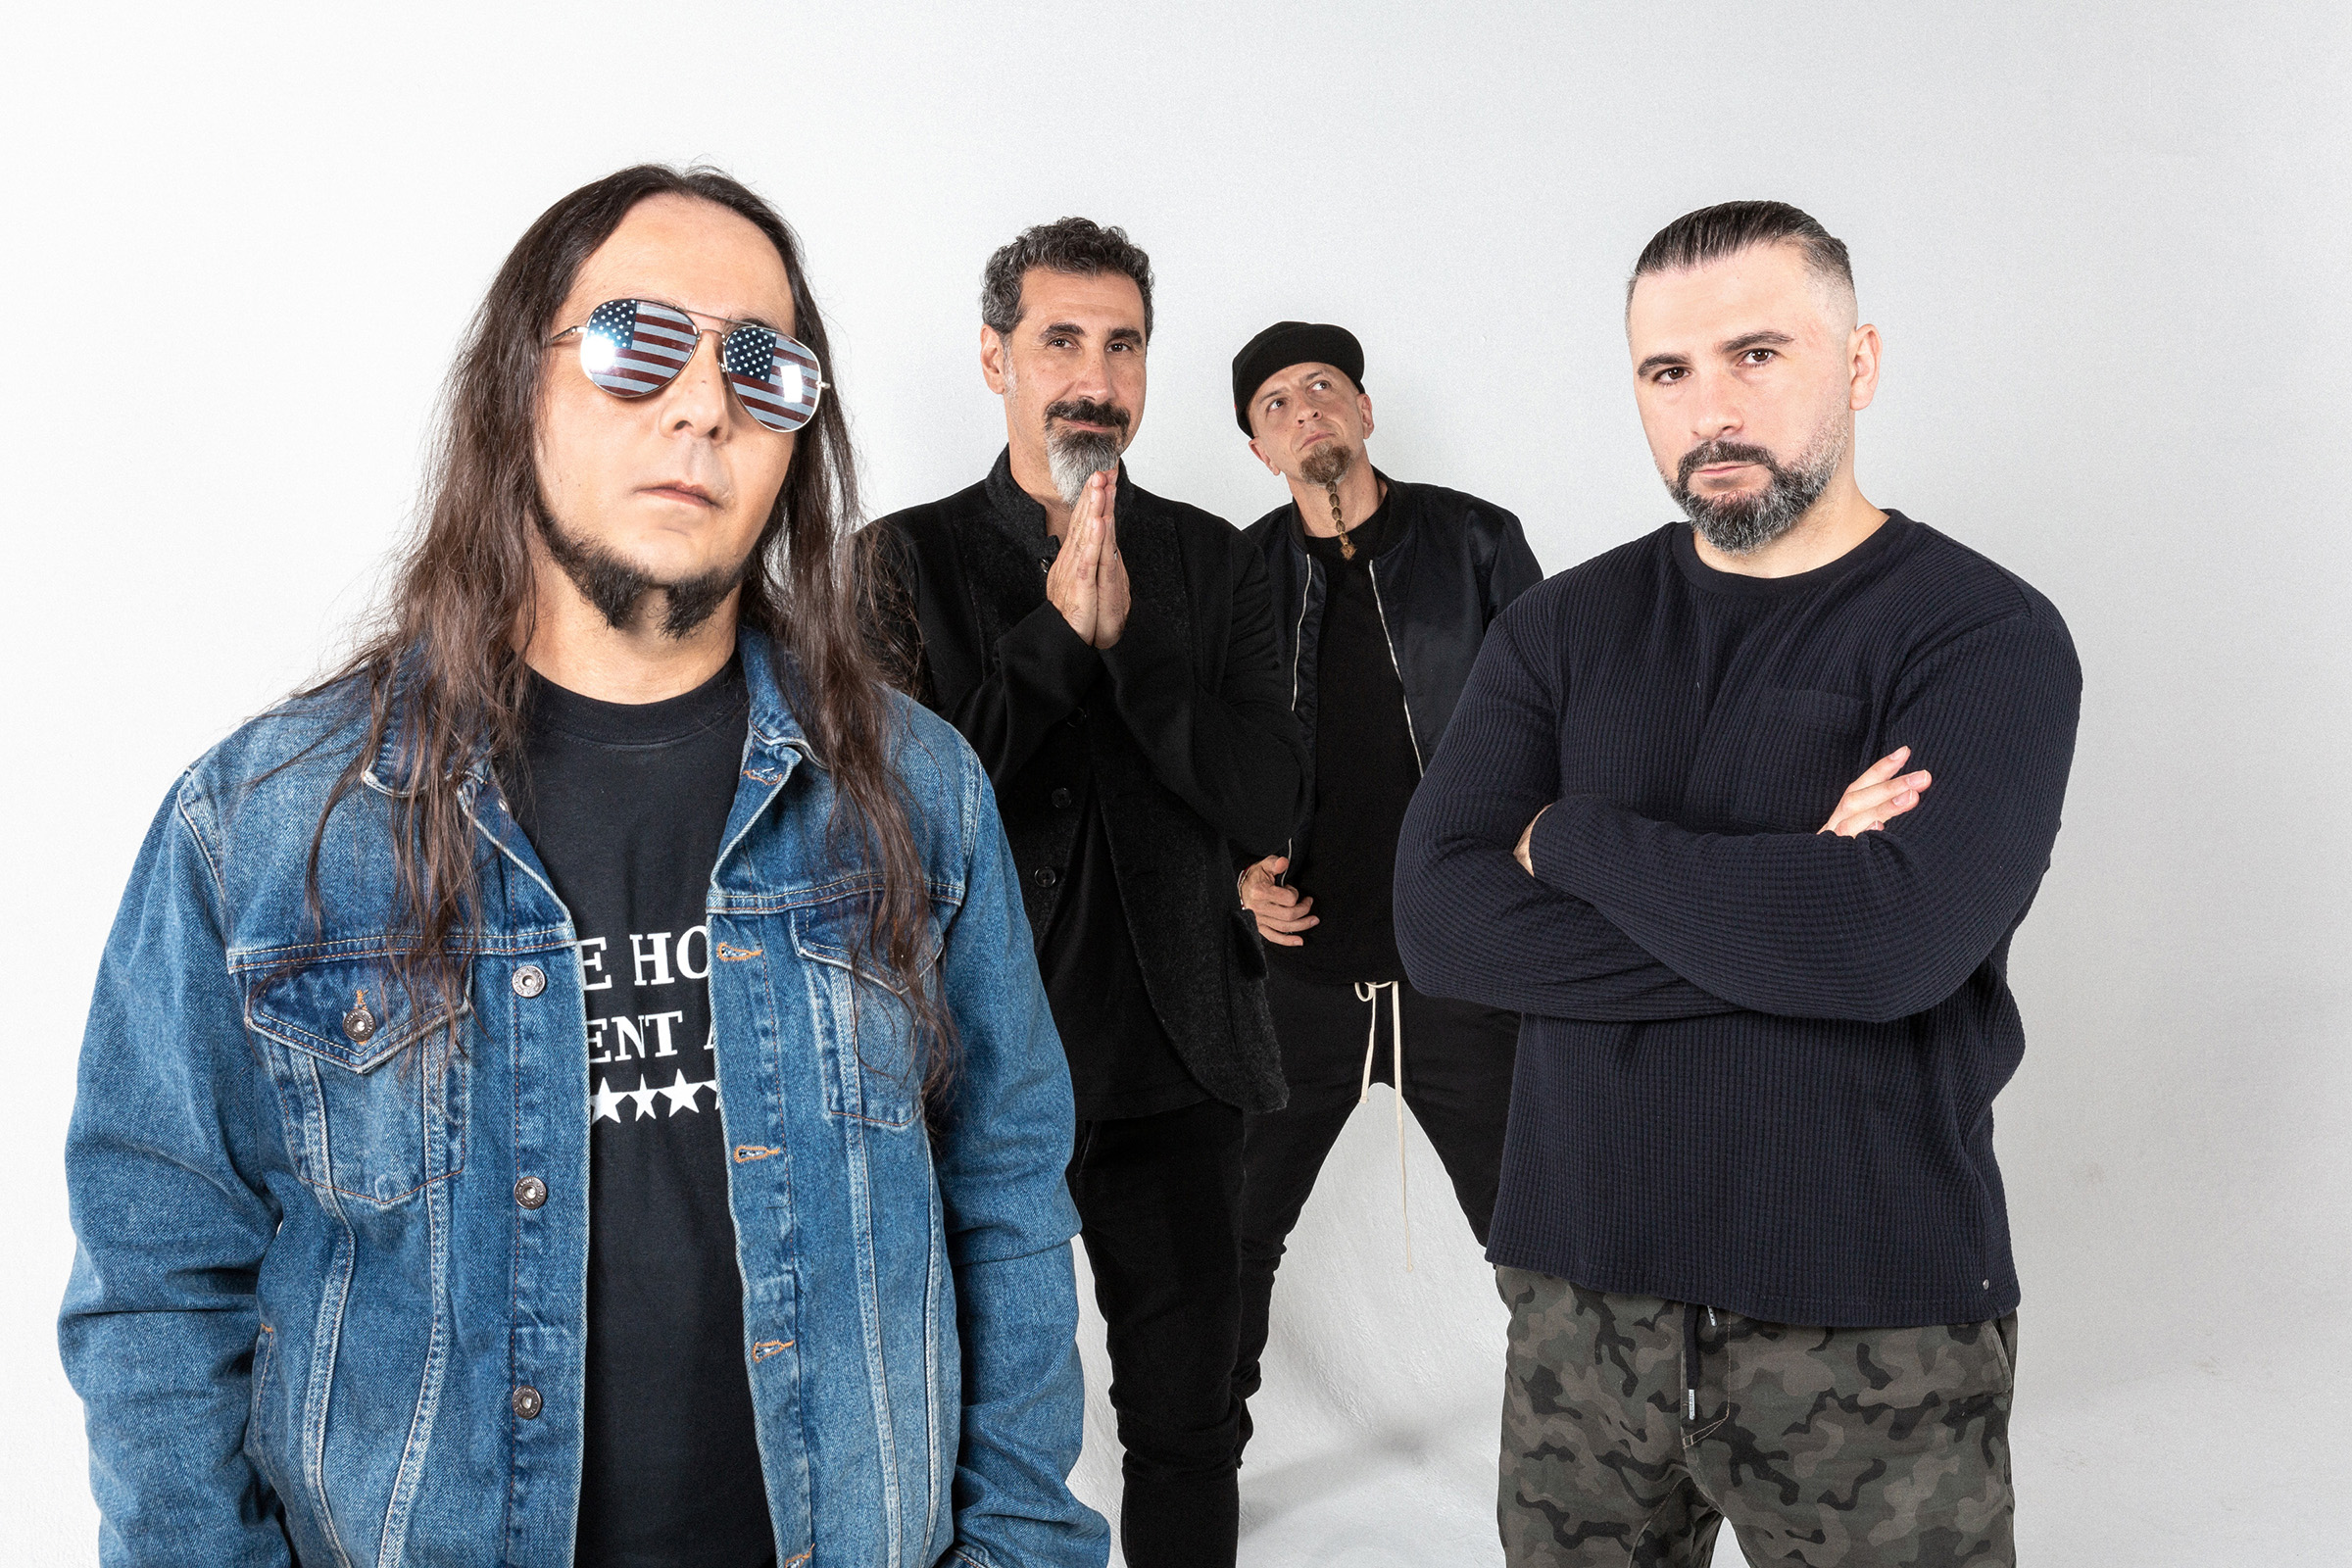 SYSTEM OF A DOWN share first new music in 15 years - Listen to ‘Protect The Land’ & ‘Genocidal Humanoidz’ Now! 1